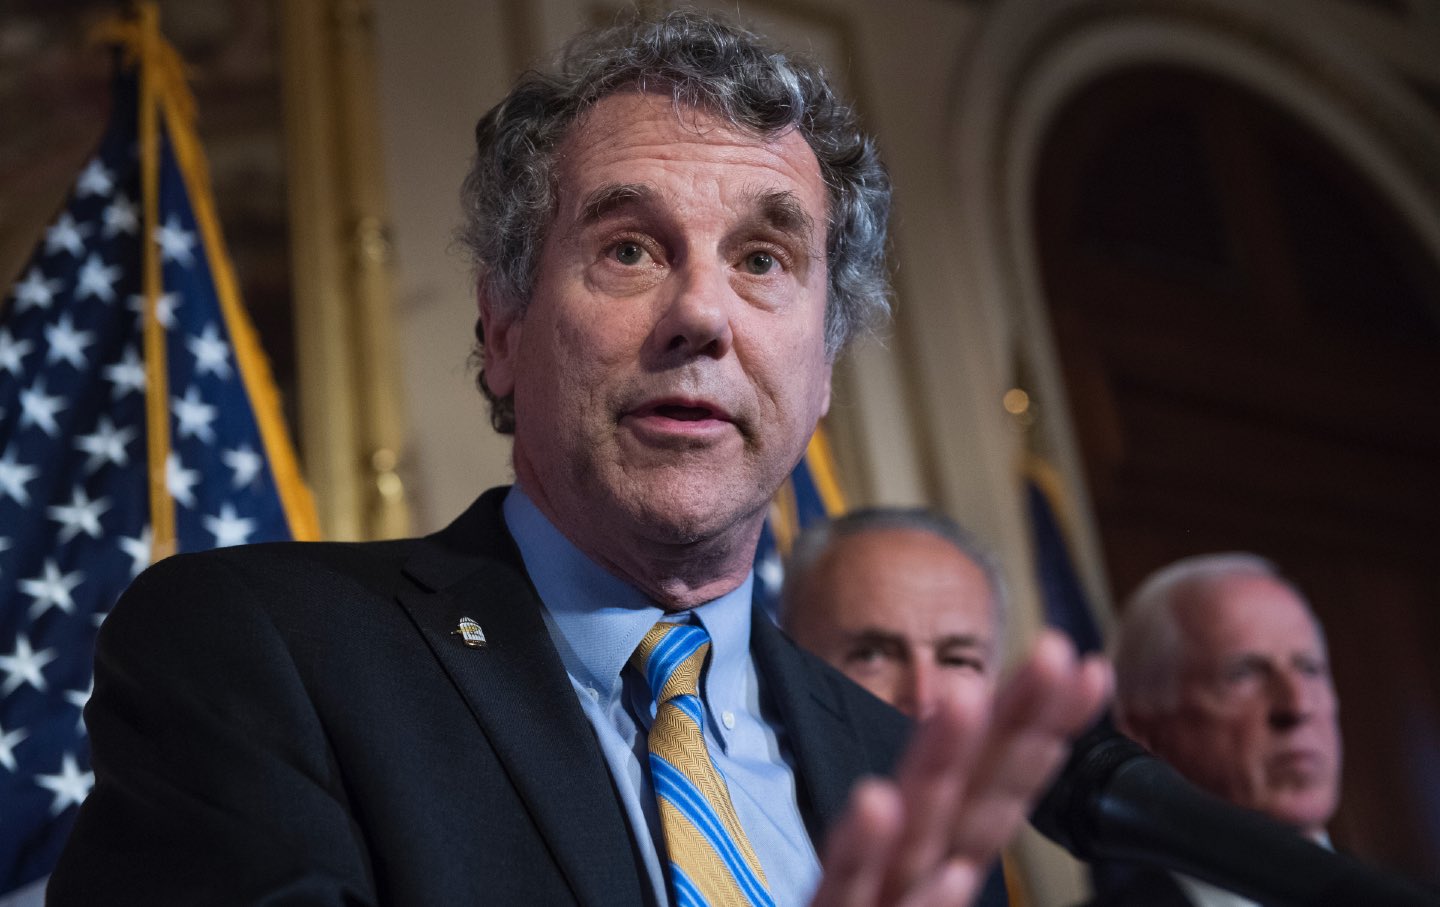 sherrod brown conducts a press conference on background checks in 2019